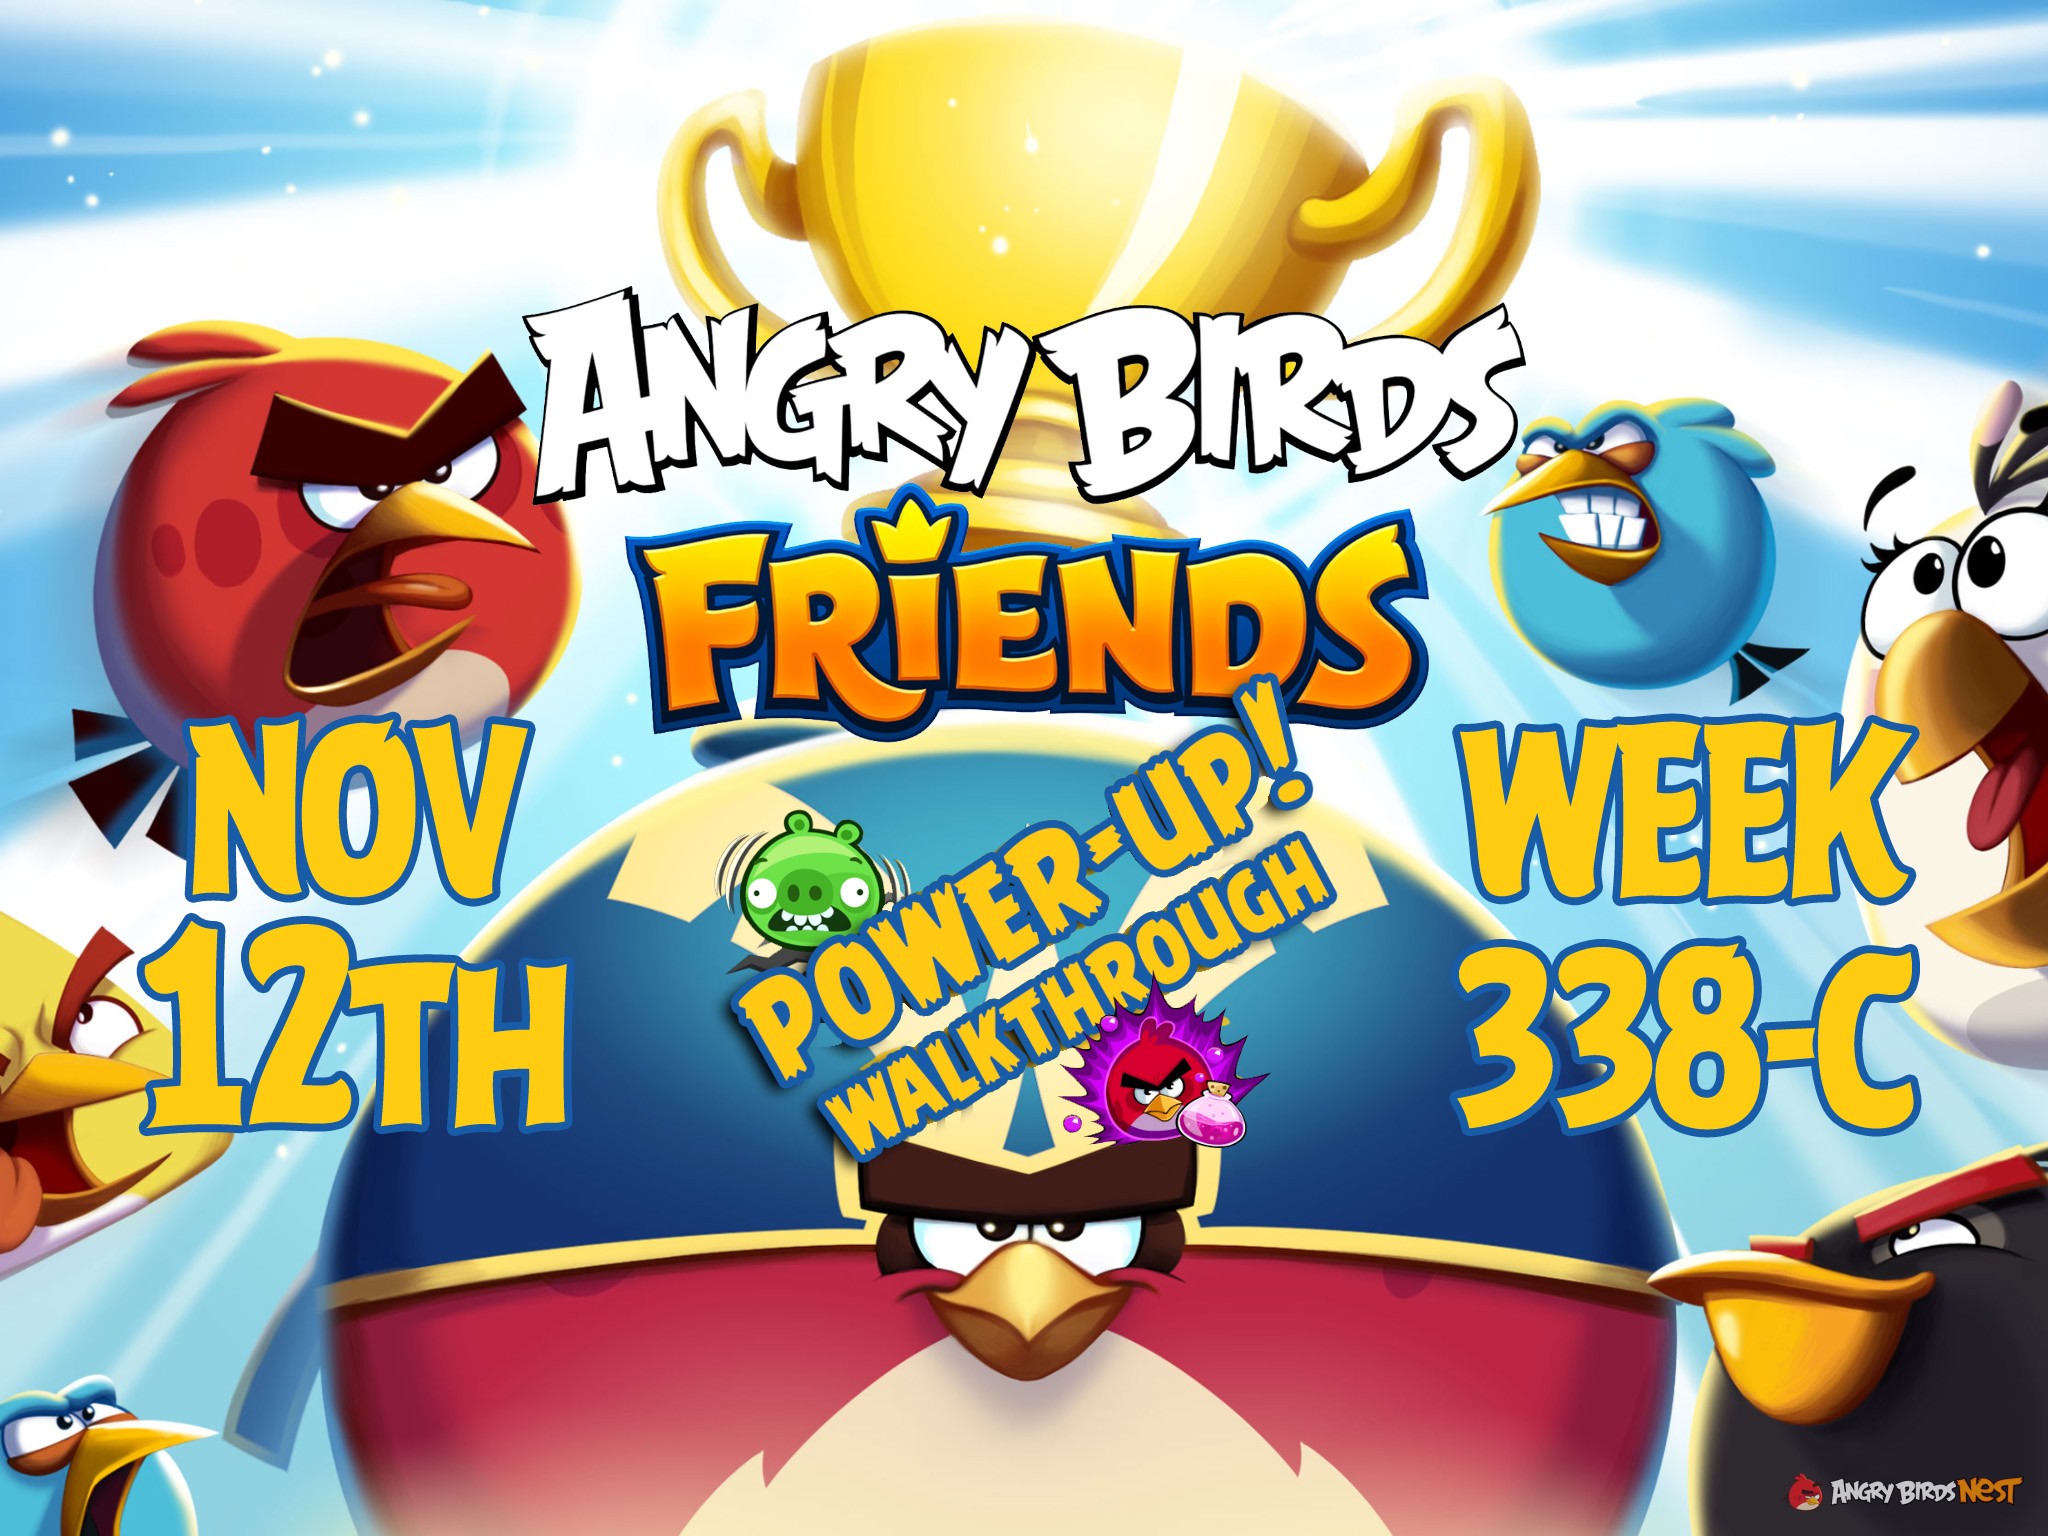 Angry-Birds-Friends-Tournament-Week-338-C-Feature-Image-PU